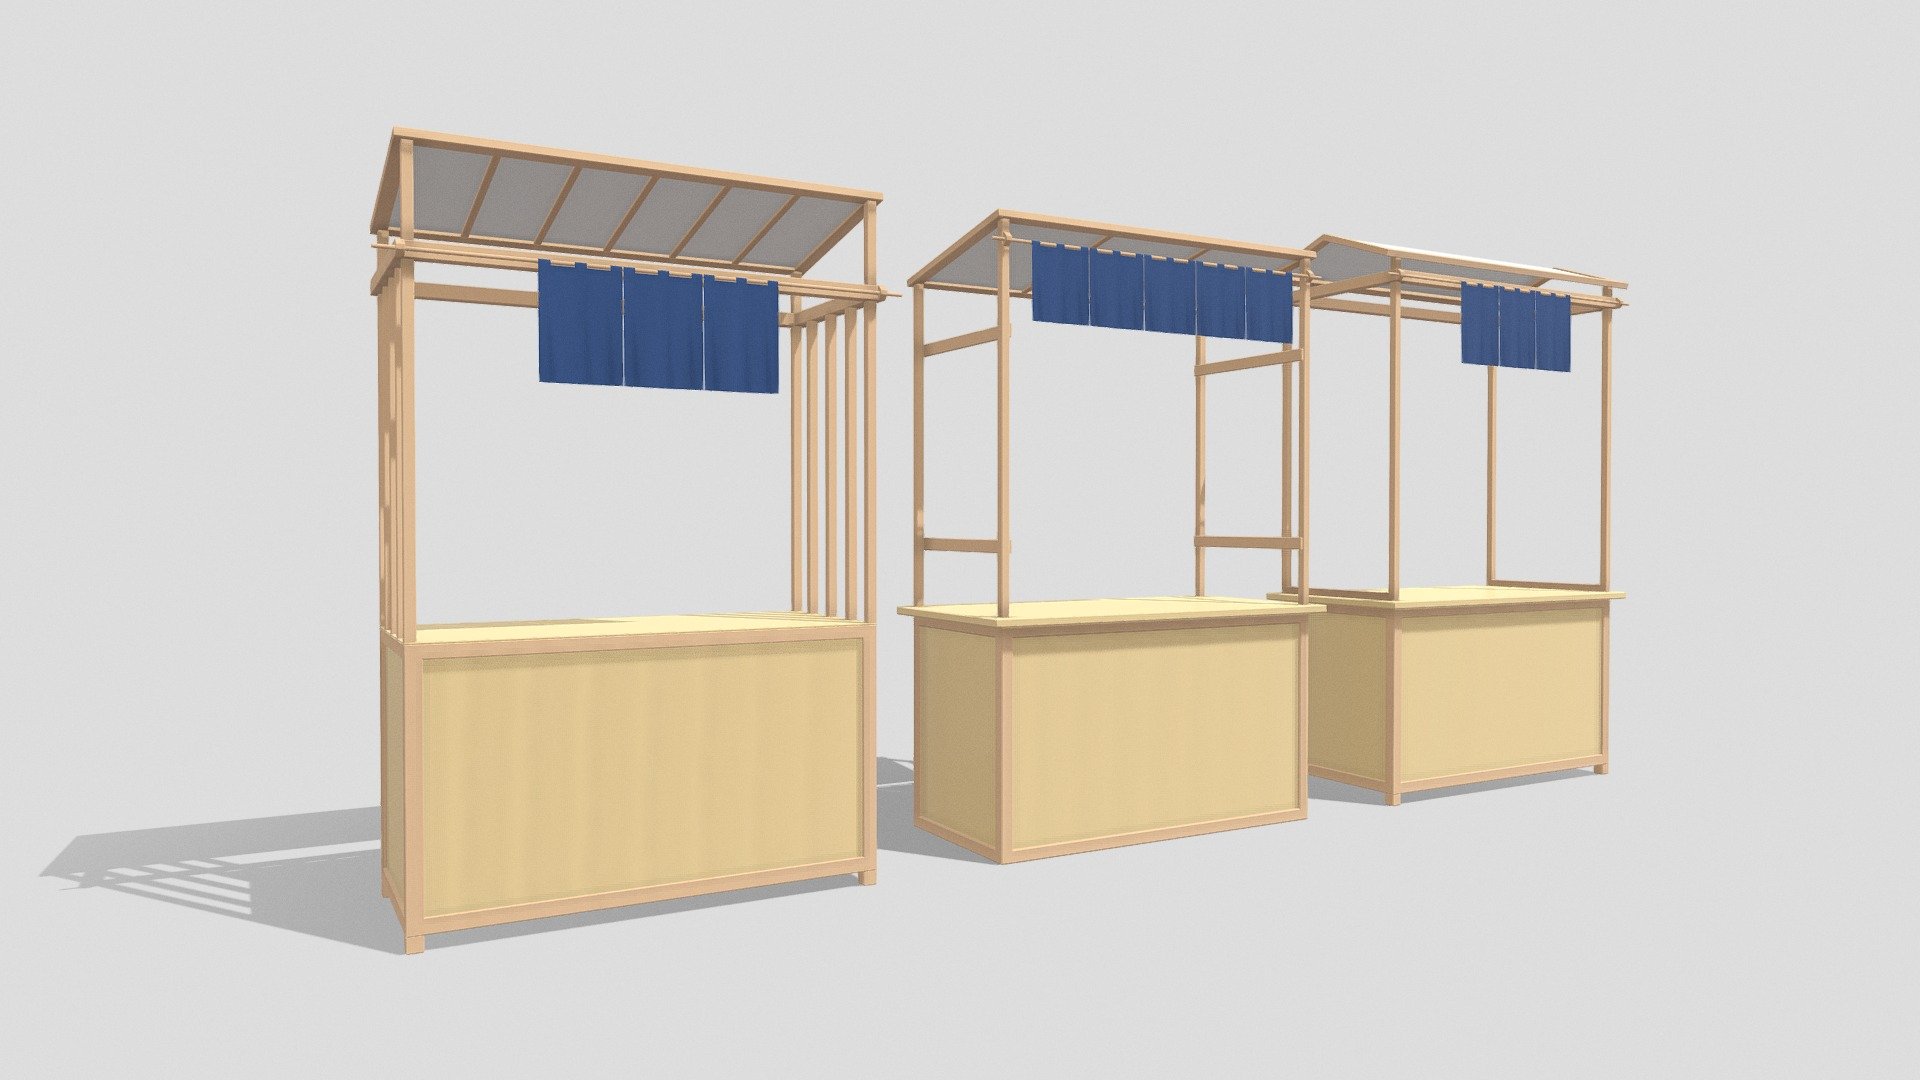 Asian Wooden Food Stands

Measurements:

Each stand is around: 1.60m x 0.80m x 2.30m (L,W,H)

IMPORTANT NOTES:




This model does not have textures or materials, but it has separate generic materials, it is also separated into parts, so you can easily assign your own materials.

Model units are on meters.

If you have any doubts or questions about this model, you can send us a message 3d model